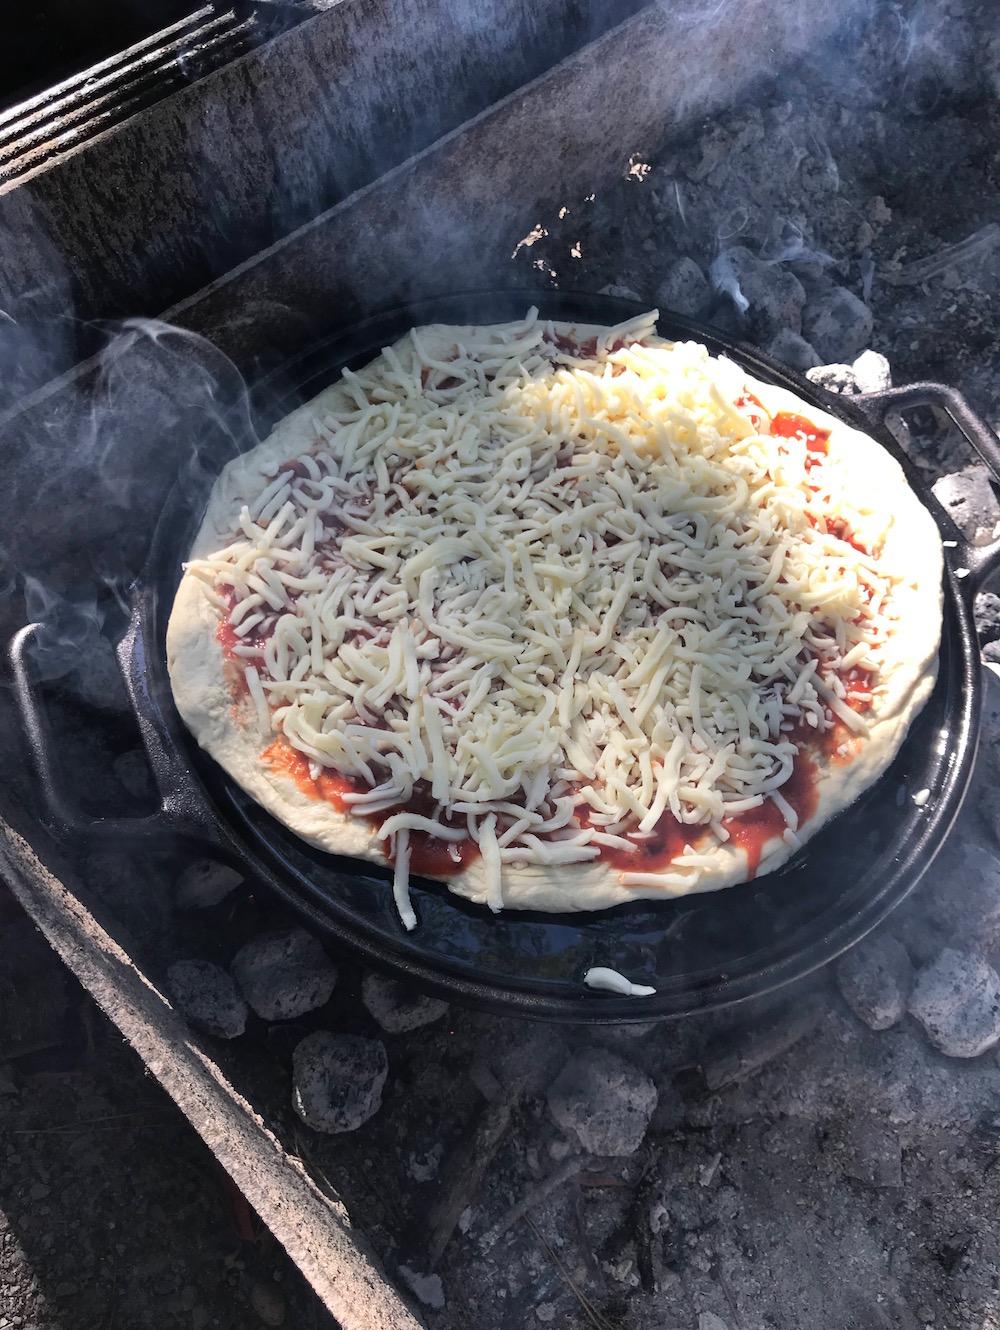 Pizza prepped and ready to cook over charcoal